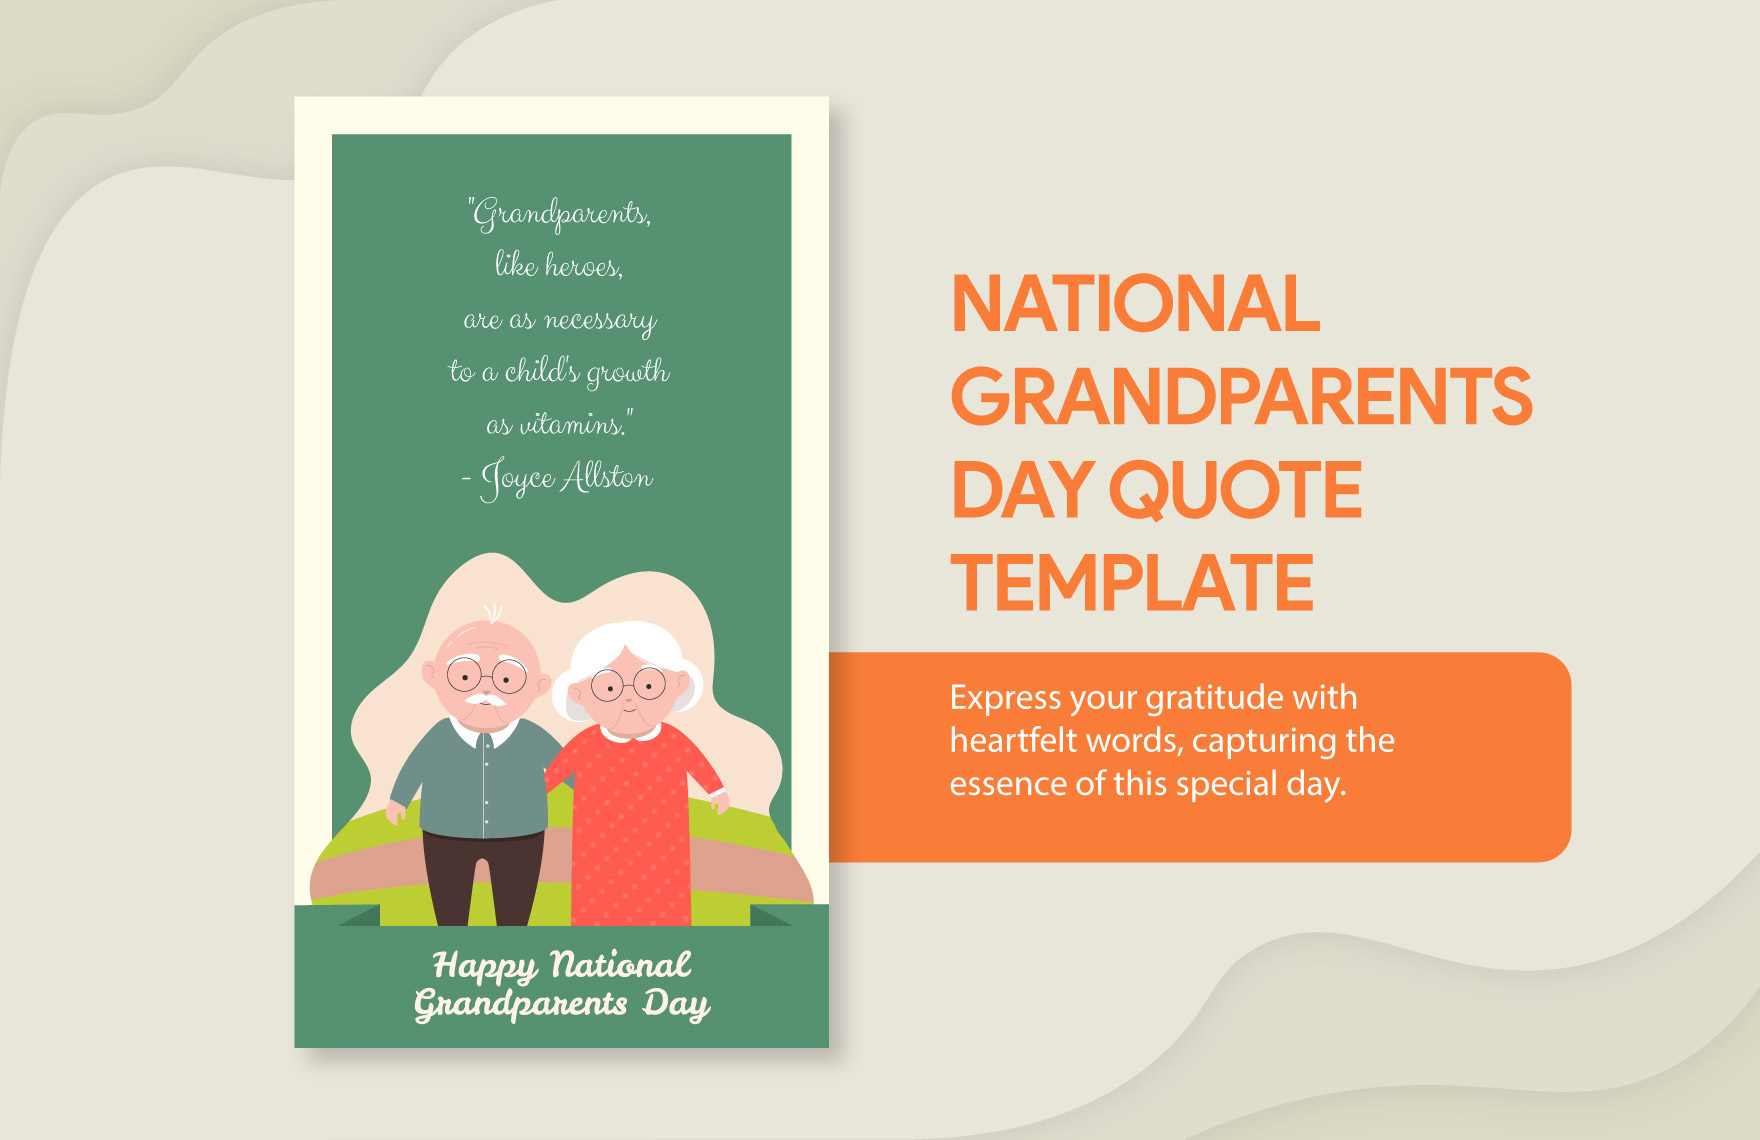 Free National Grandparents Day Quote in Illustrator, PSD, PNG